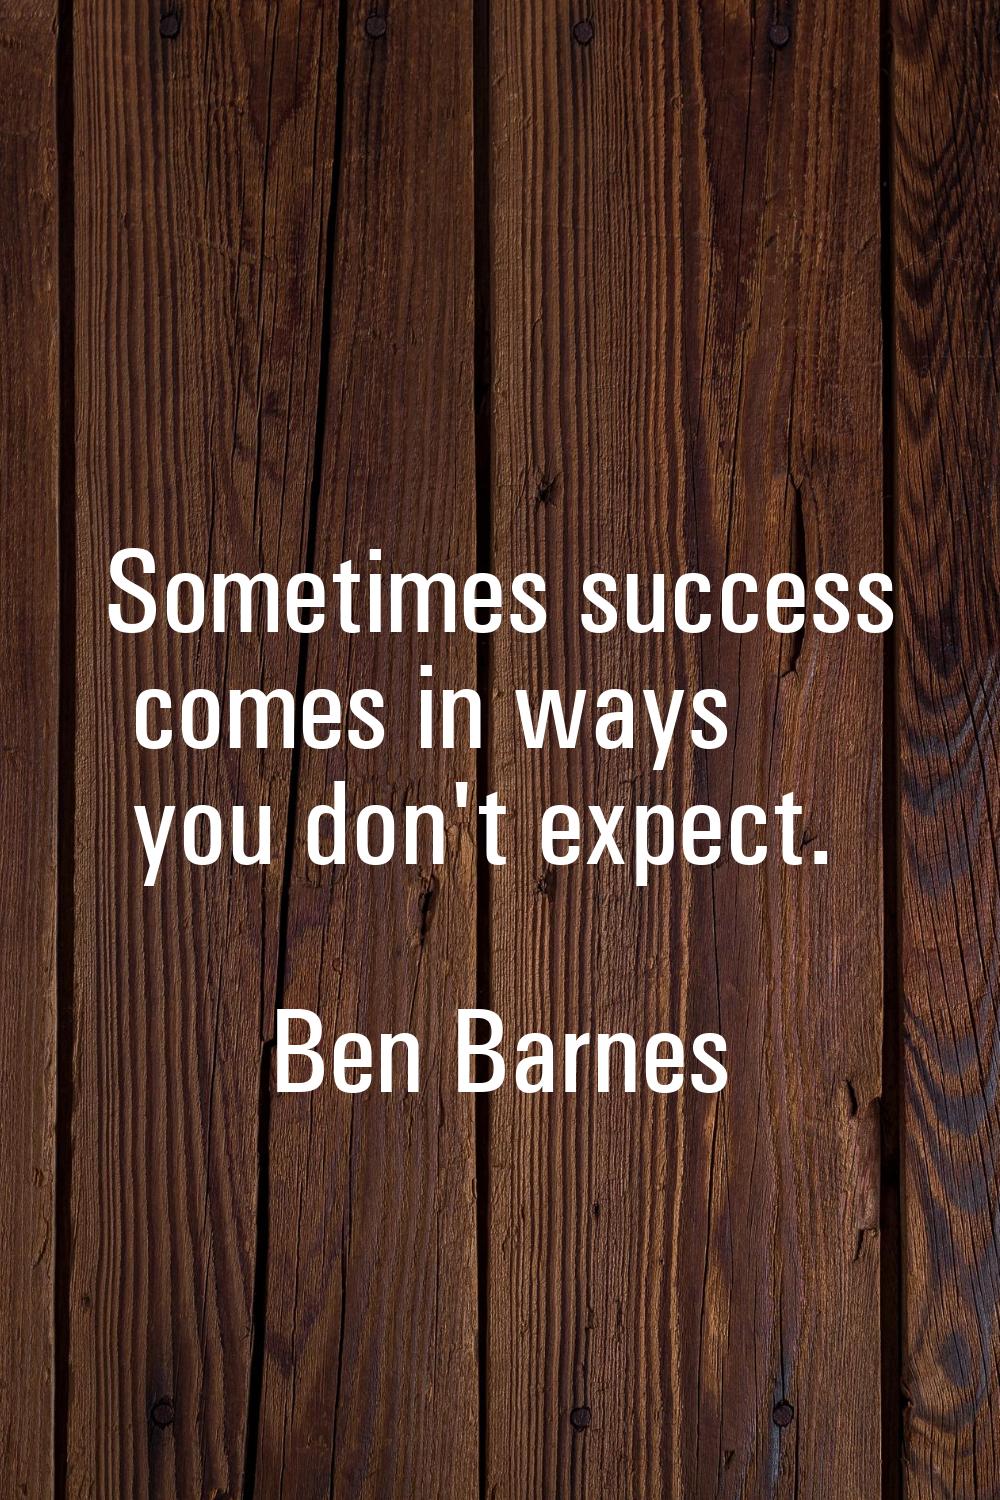 Sometimes success comes in ways you don't expect.